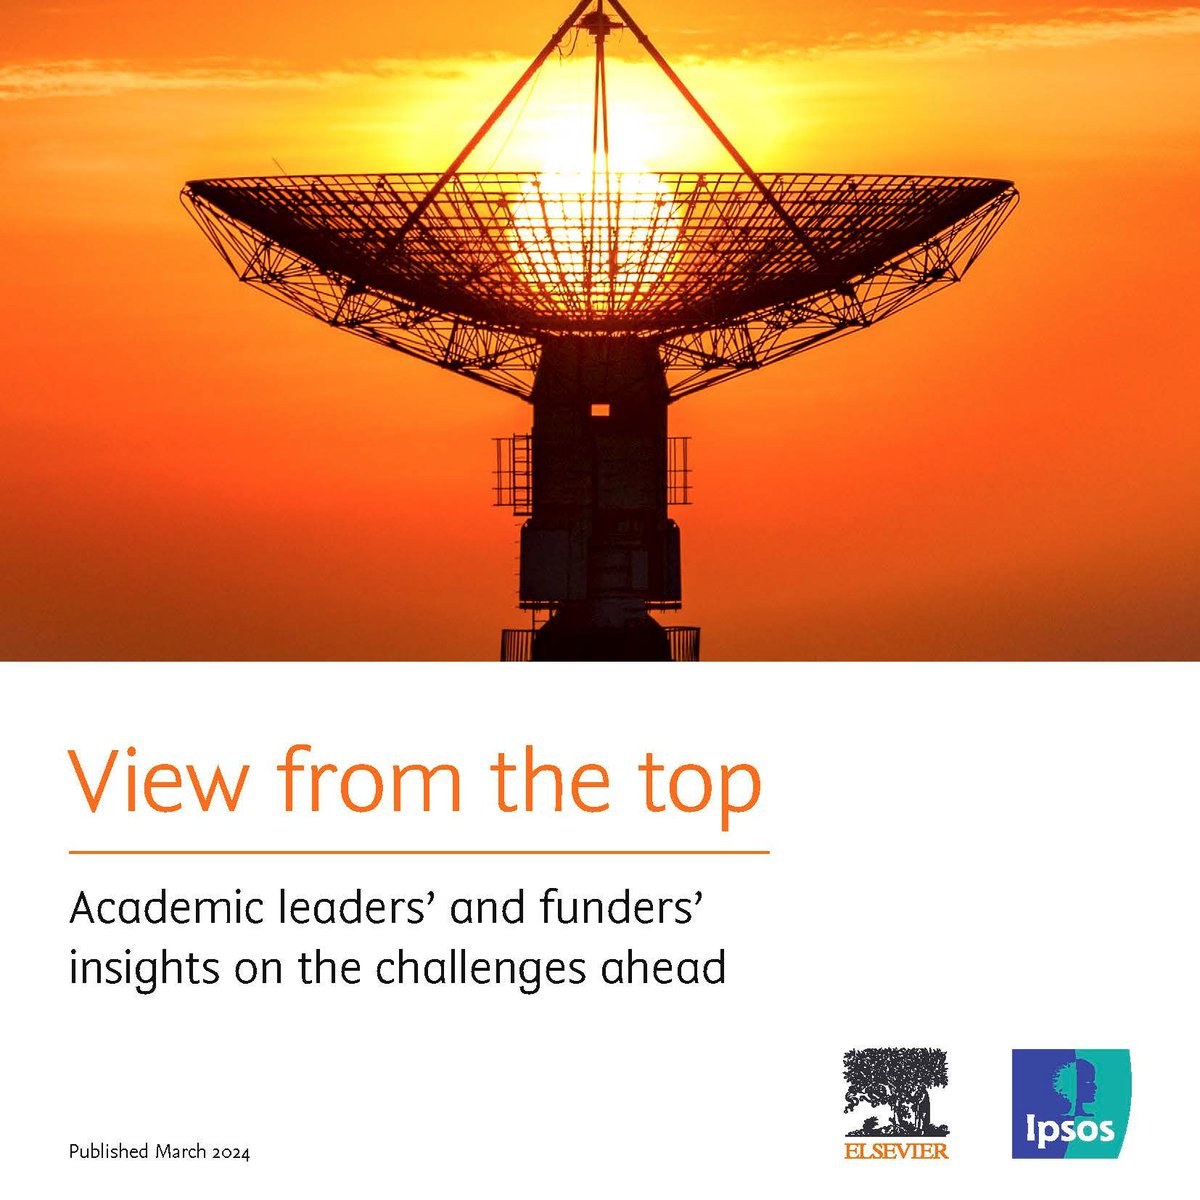 Check out the findings of @ElsevierConnect new detailed report titled 'View from the Top', contributed by 6 #APRU member universities @CUHKofficial, @USC, @UCIrvine, Pusan National University, @UQ_News and @AucklandUni. Read the Report here: elsevier.com/academic-and-g…